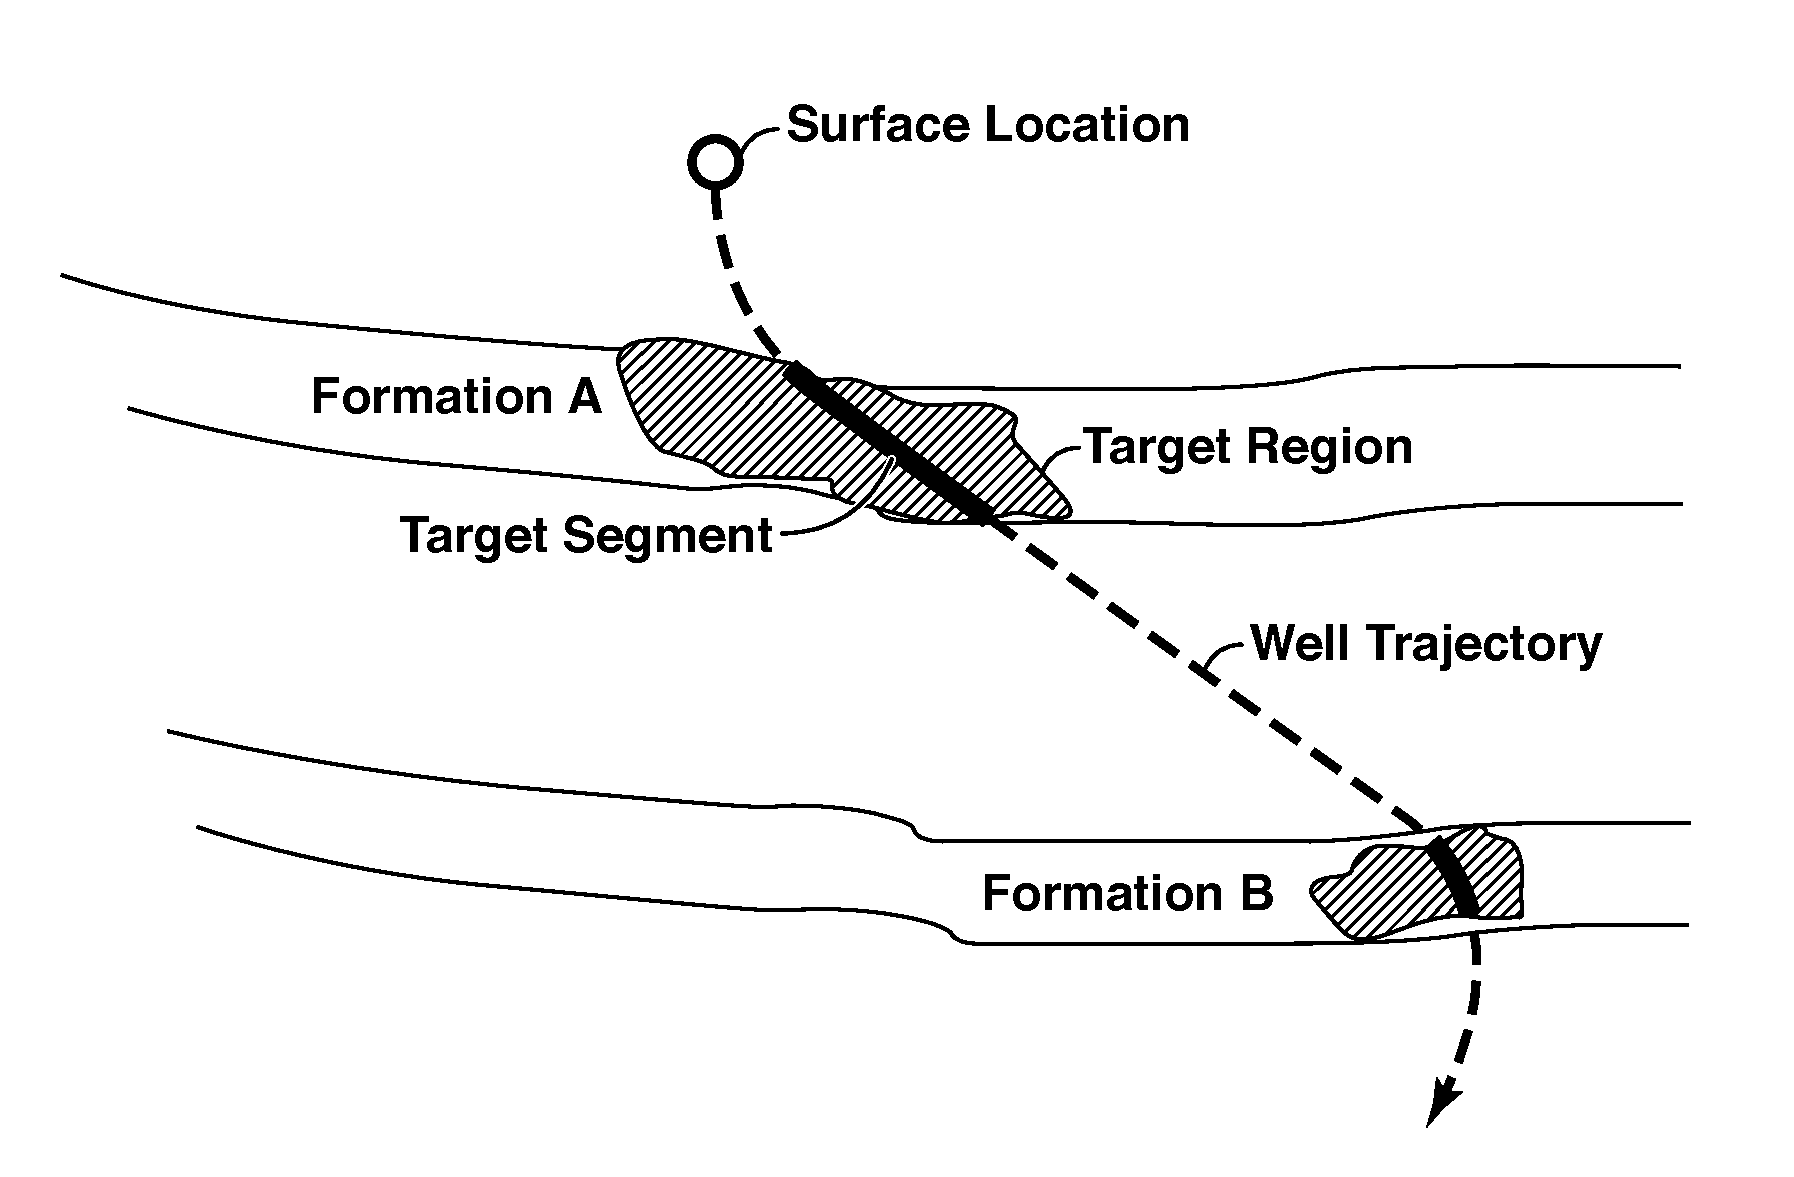 Method For Using Dynamic Target Region For Well Path/Drill Center Optimization